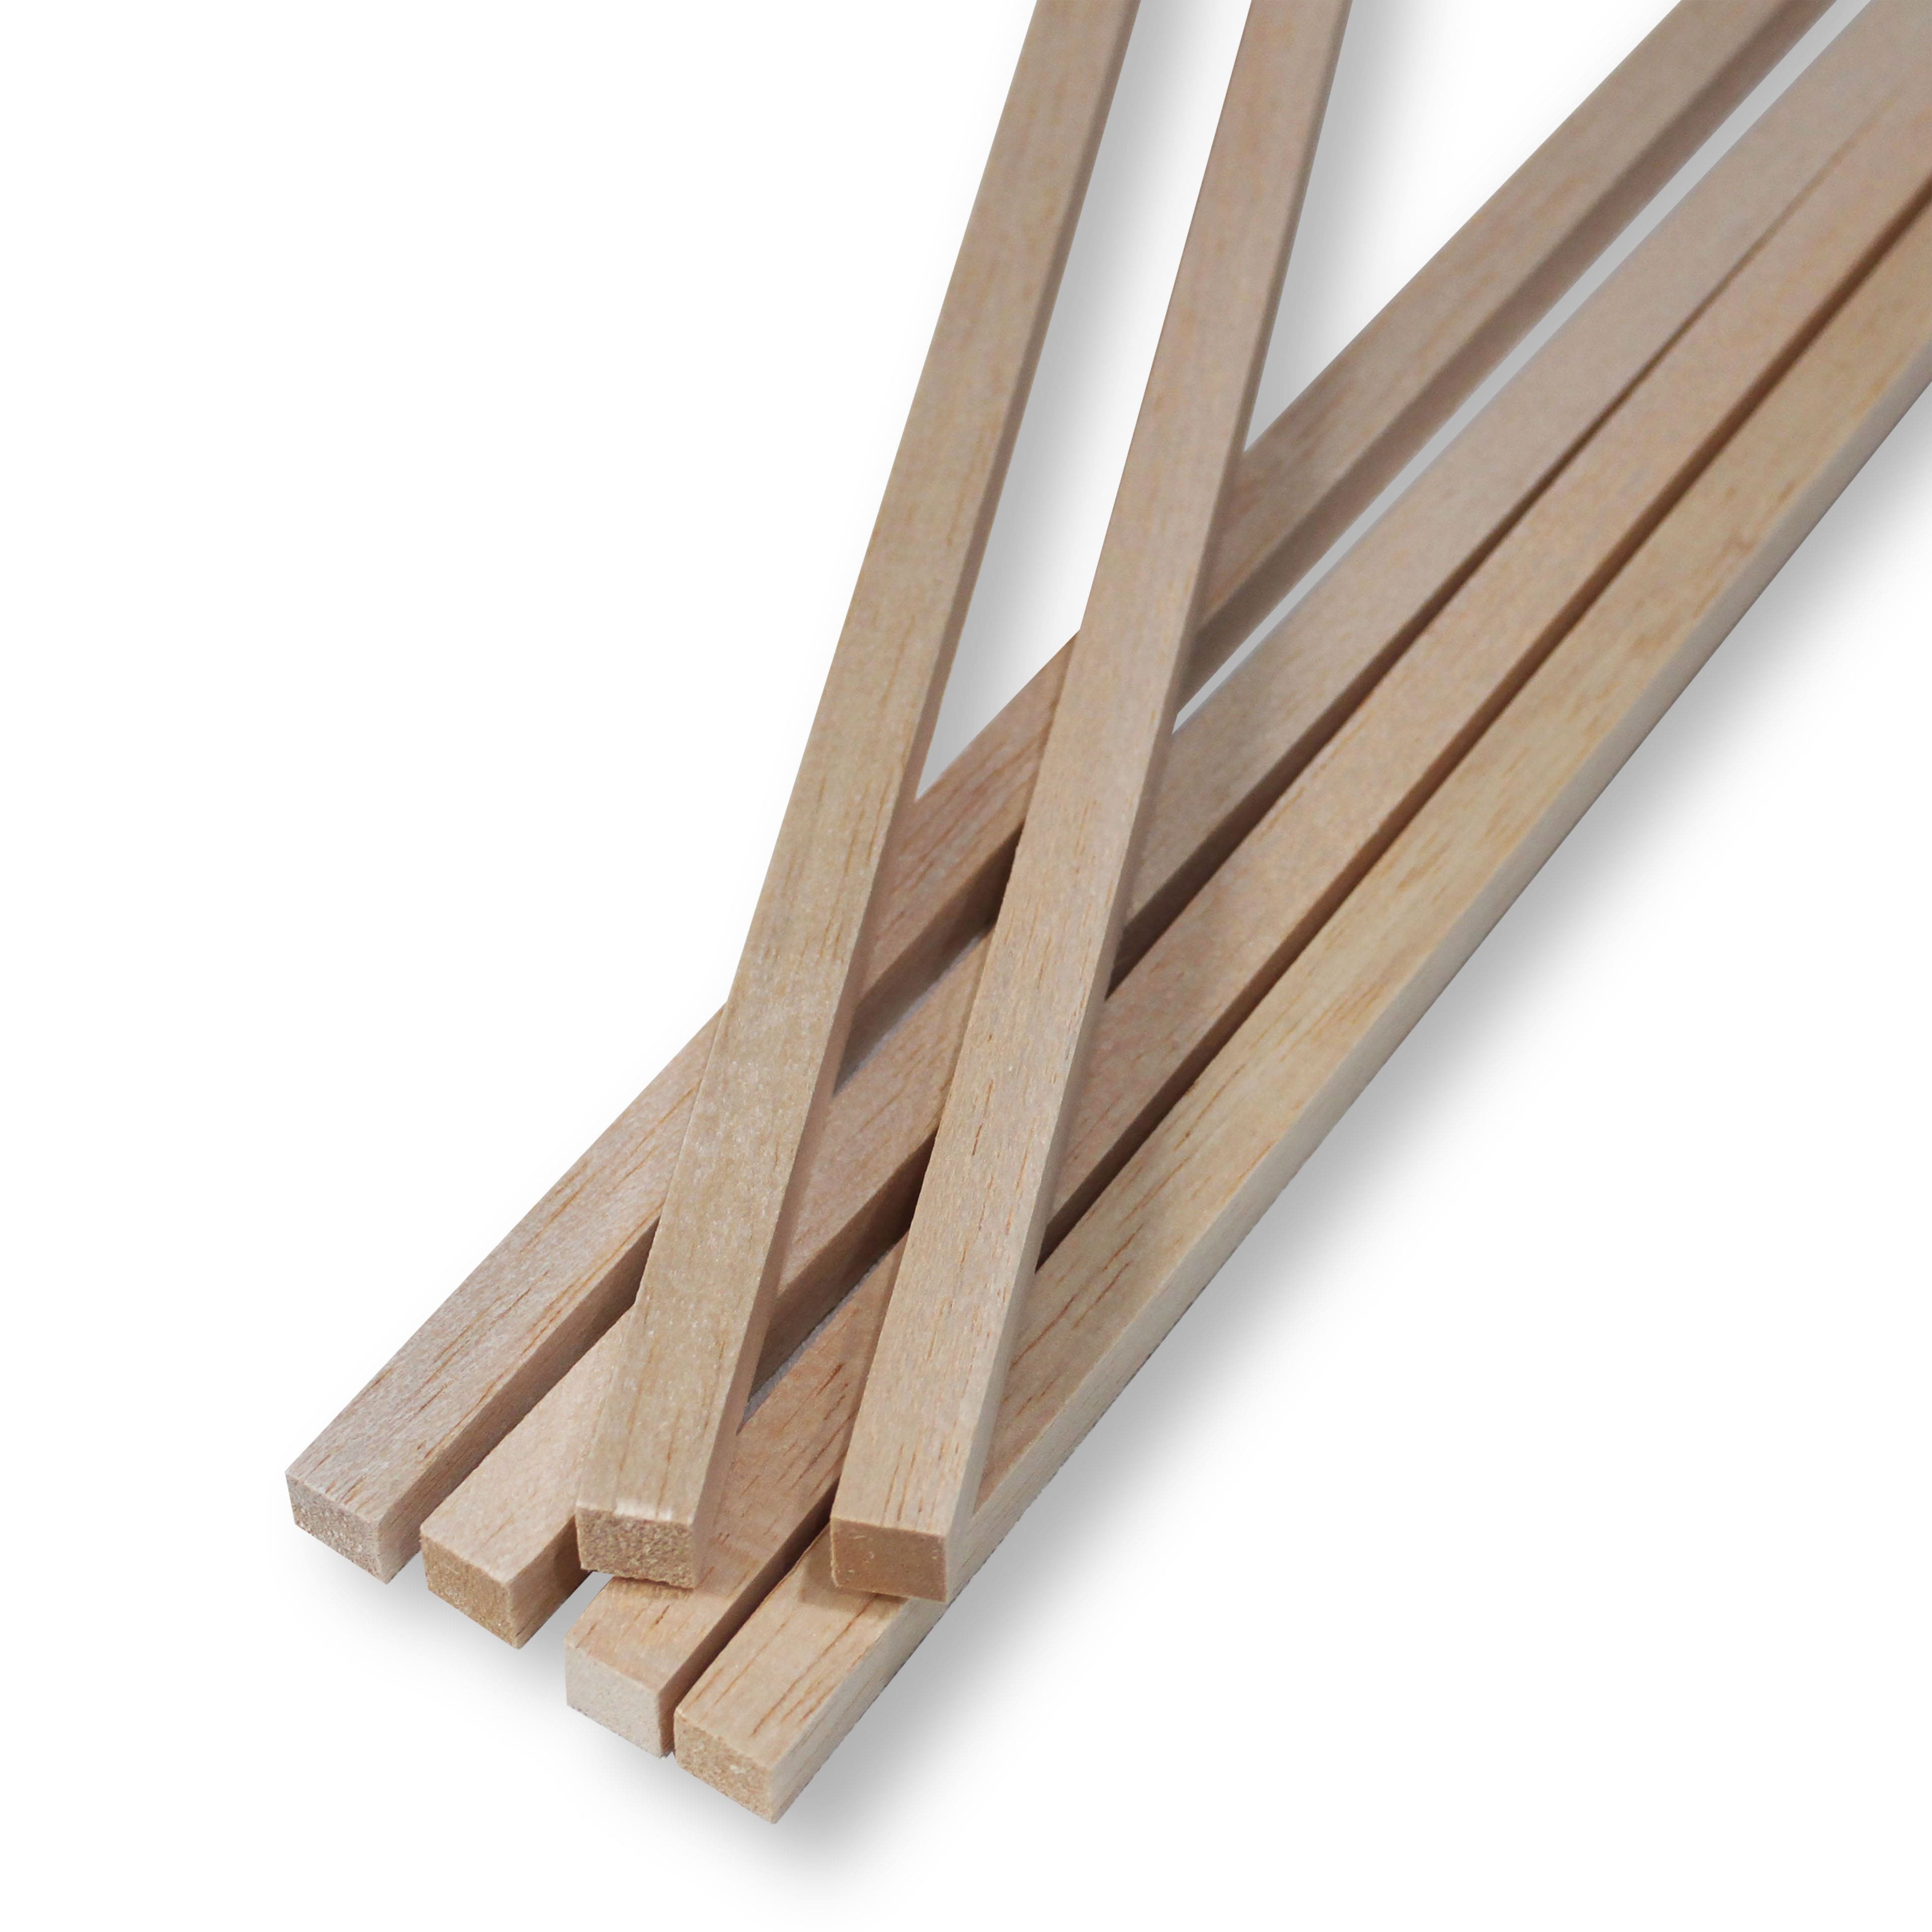 Guillow's Balsa Wood Square Dowels - 3/8 x 36 in